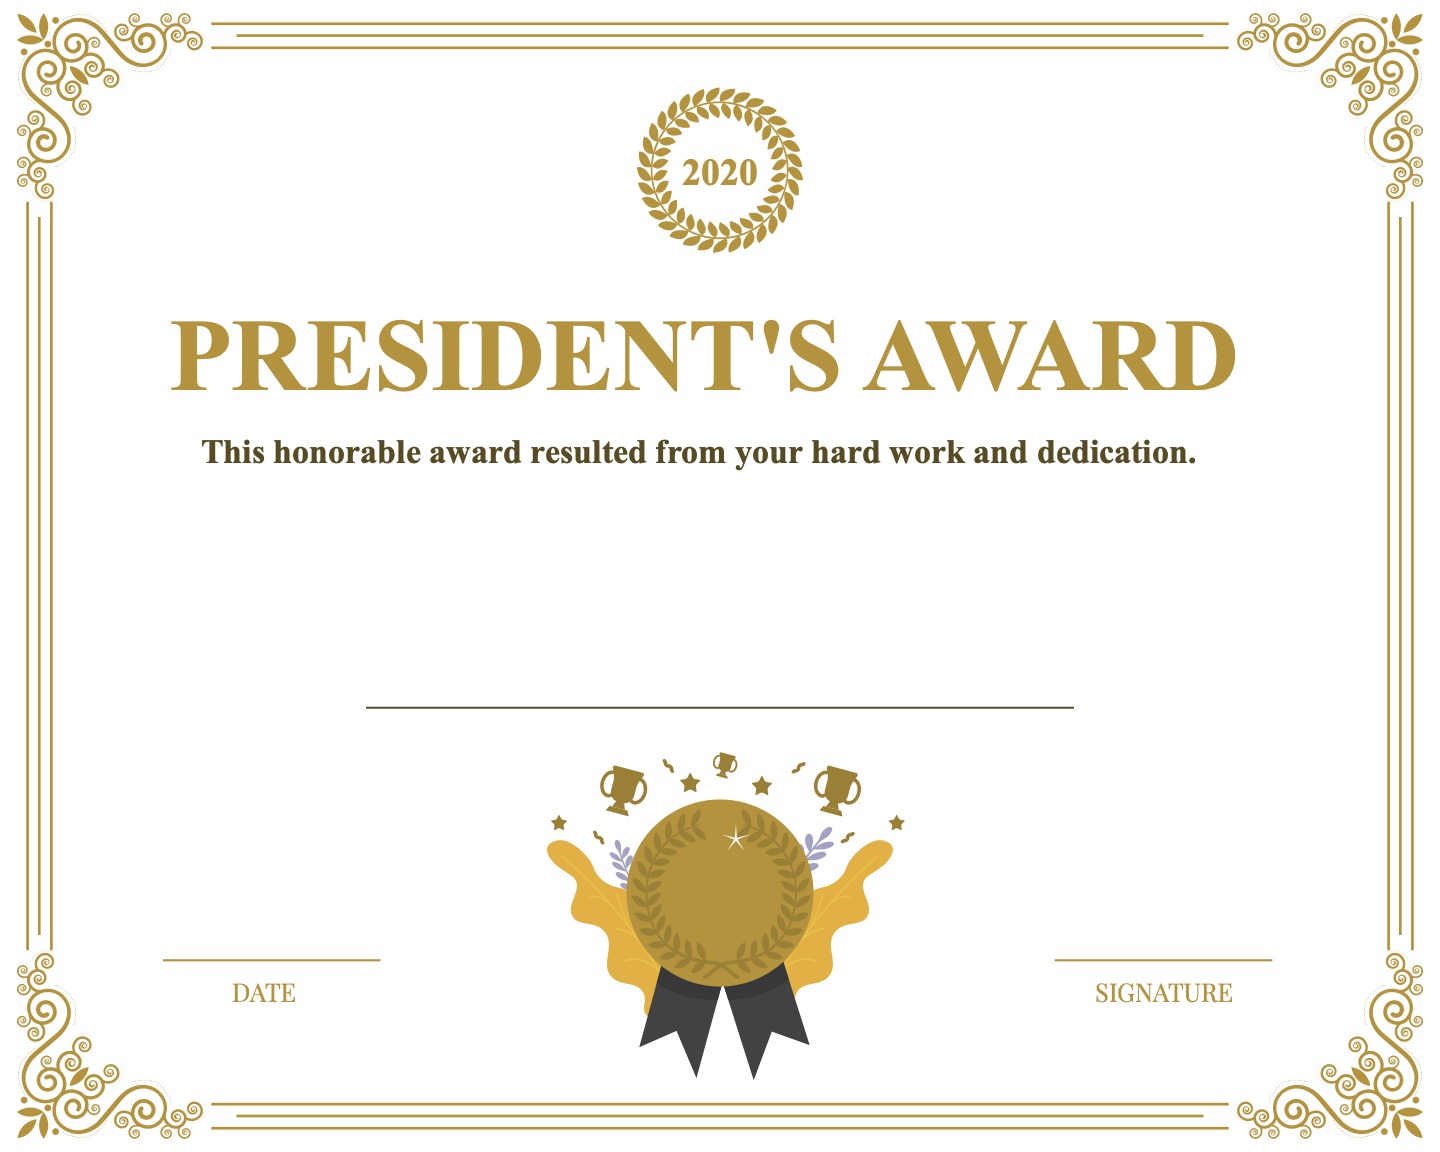 10 Amazing Award Certificate Templates in 2021 Recognize